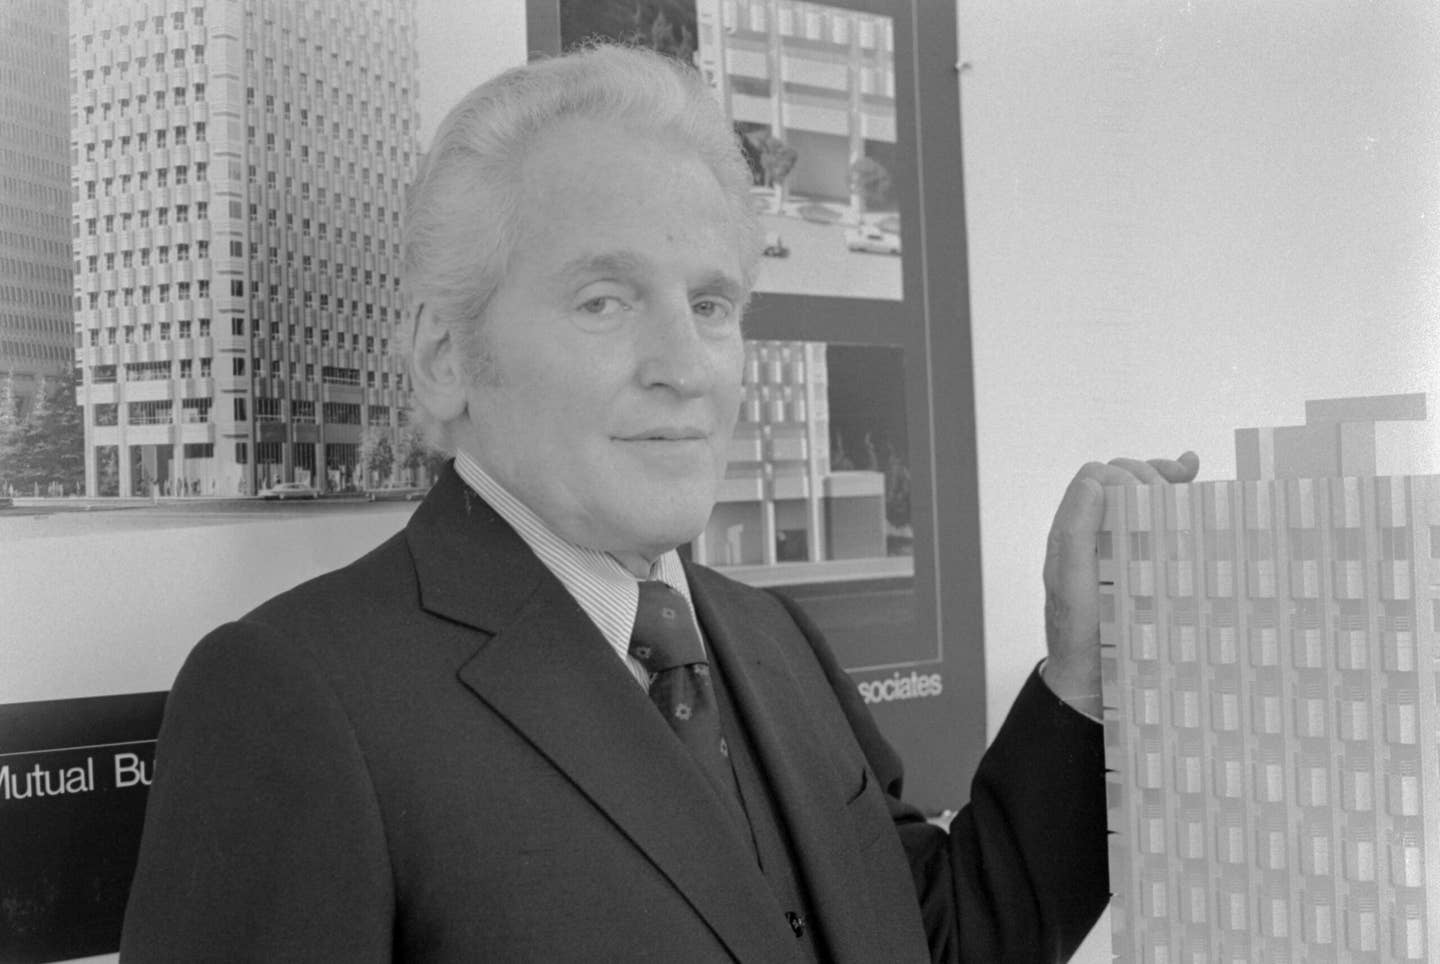 Architect William L. Pereira stands next to an architectural model. <em>Photo by © Roger Ressmeyer/CORBIS/VCG via Getty Images</em>